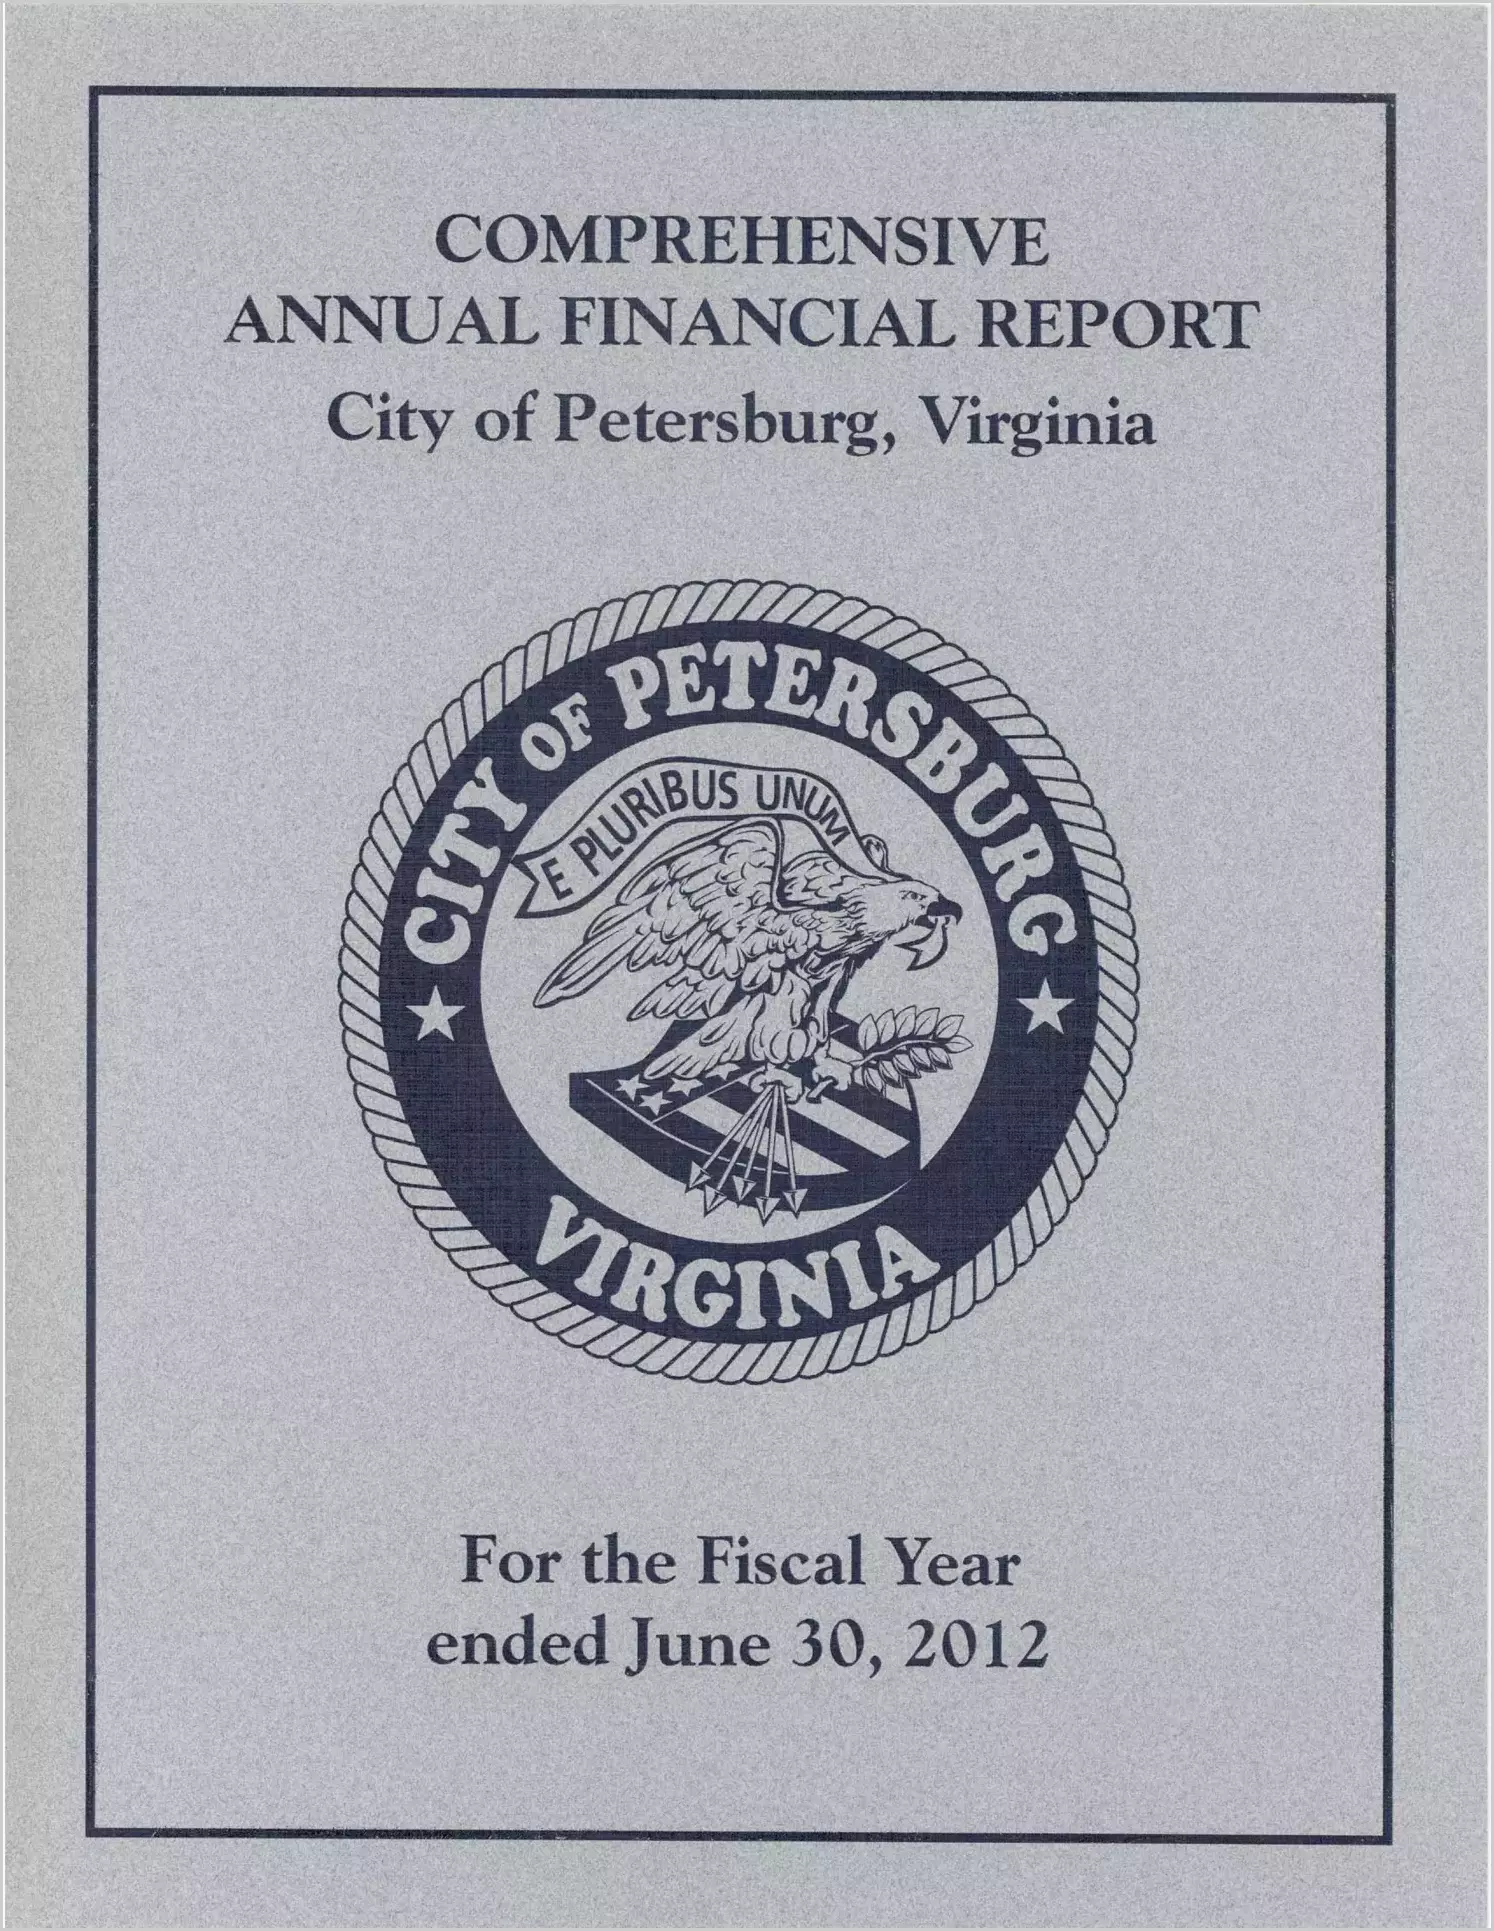 2012 Annual Financial Report for City of Petersburg